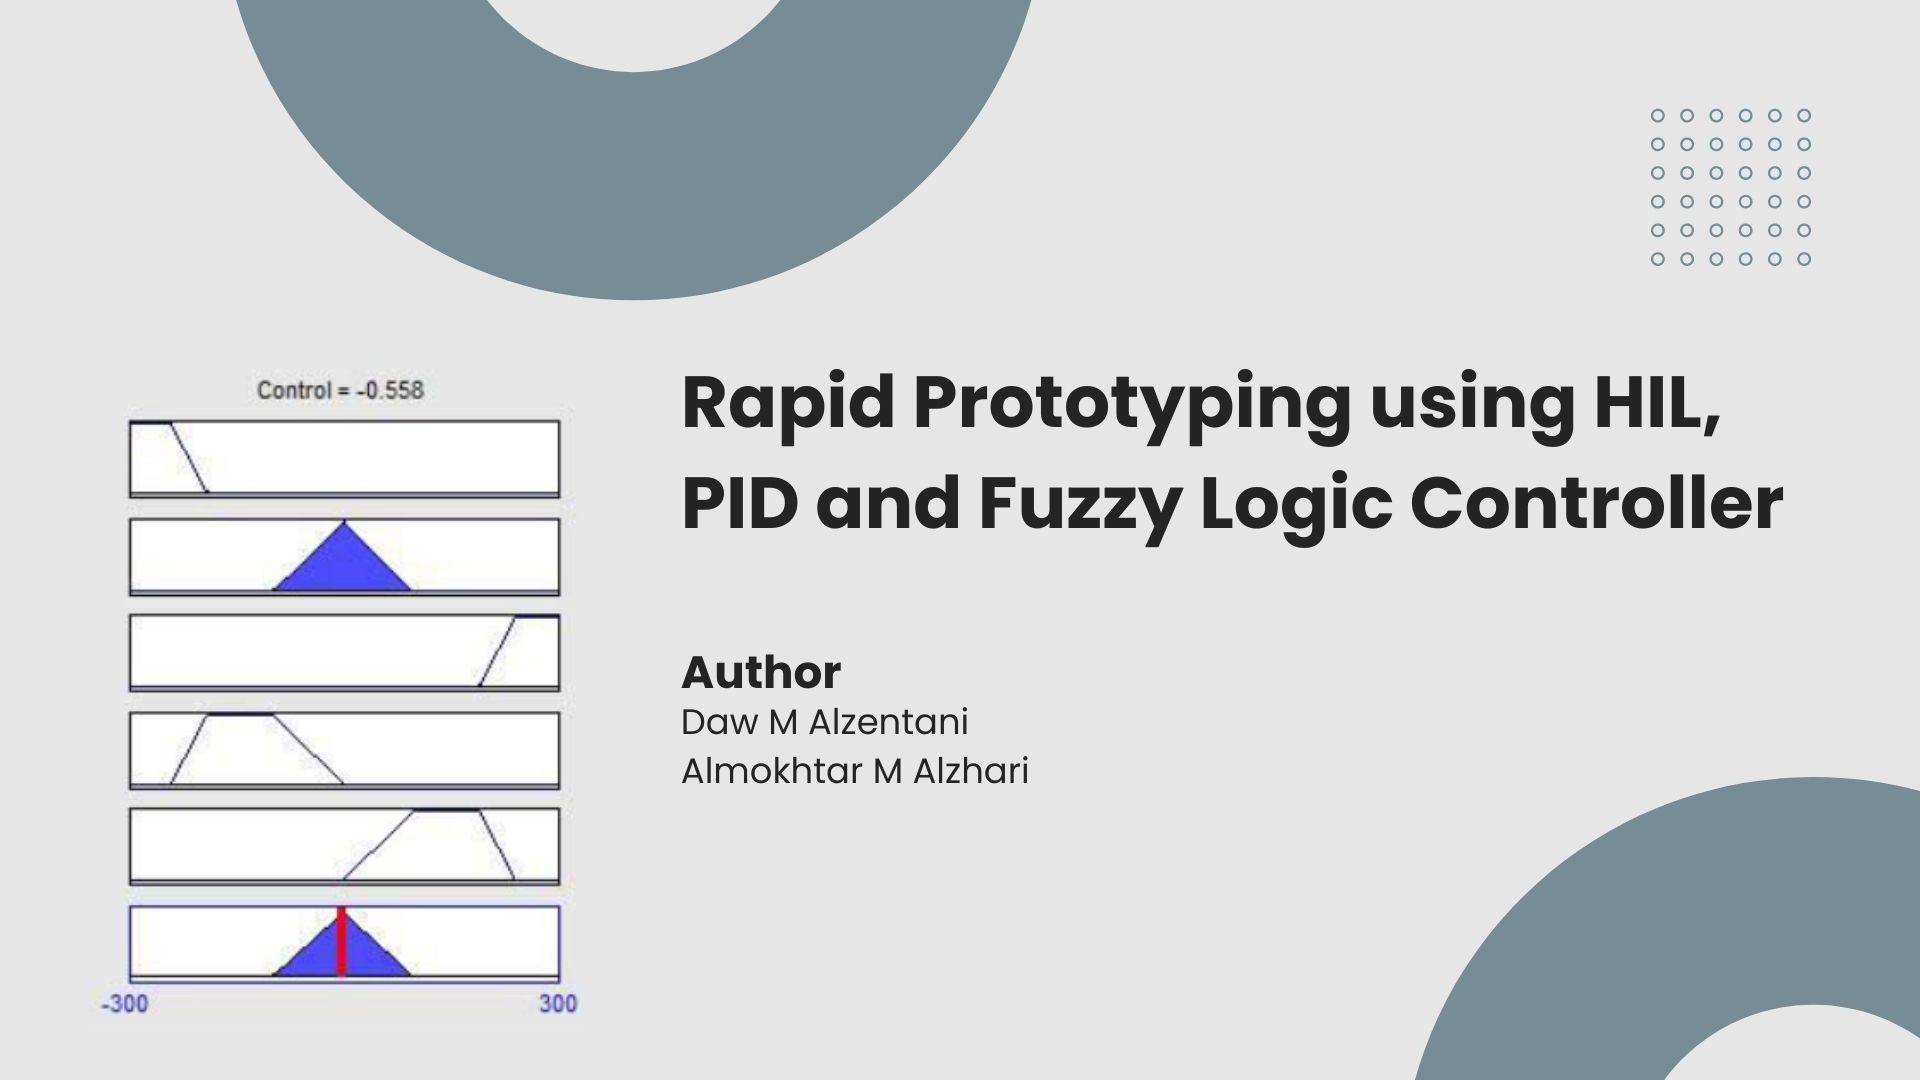 Rapid Prototyping using HIL, PID and Fuzzy Logic Controller